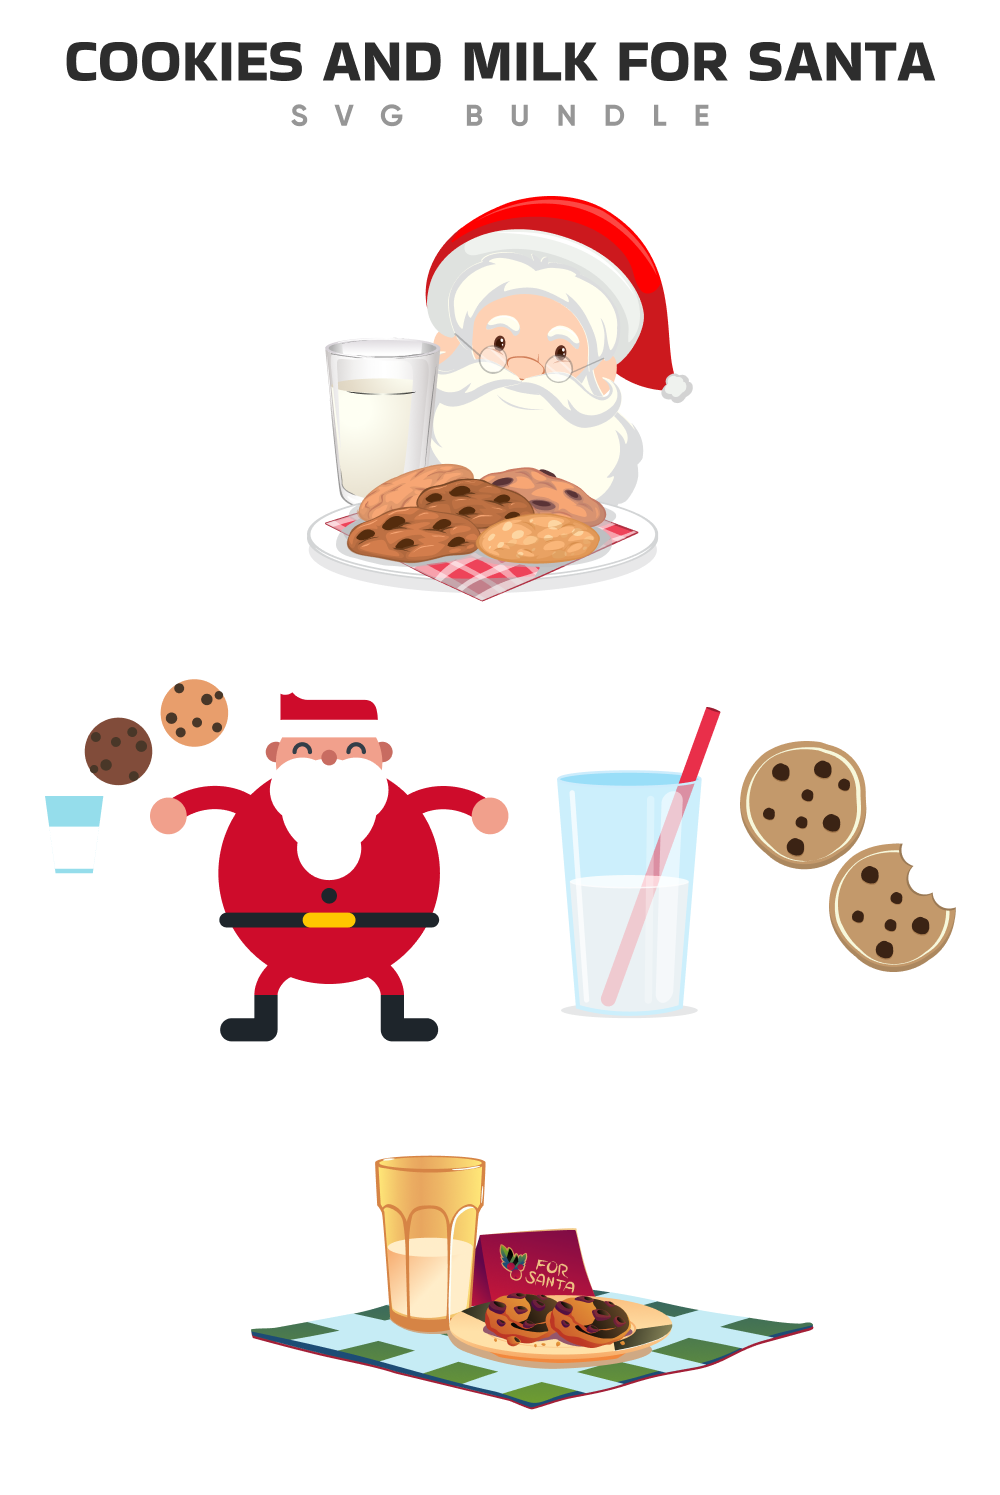 Cookies and milk for santa svg pinterest.